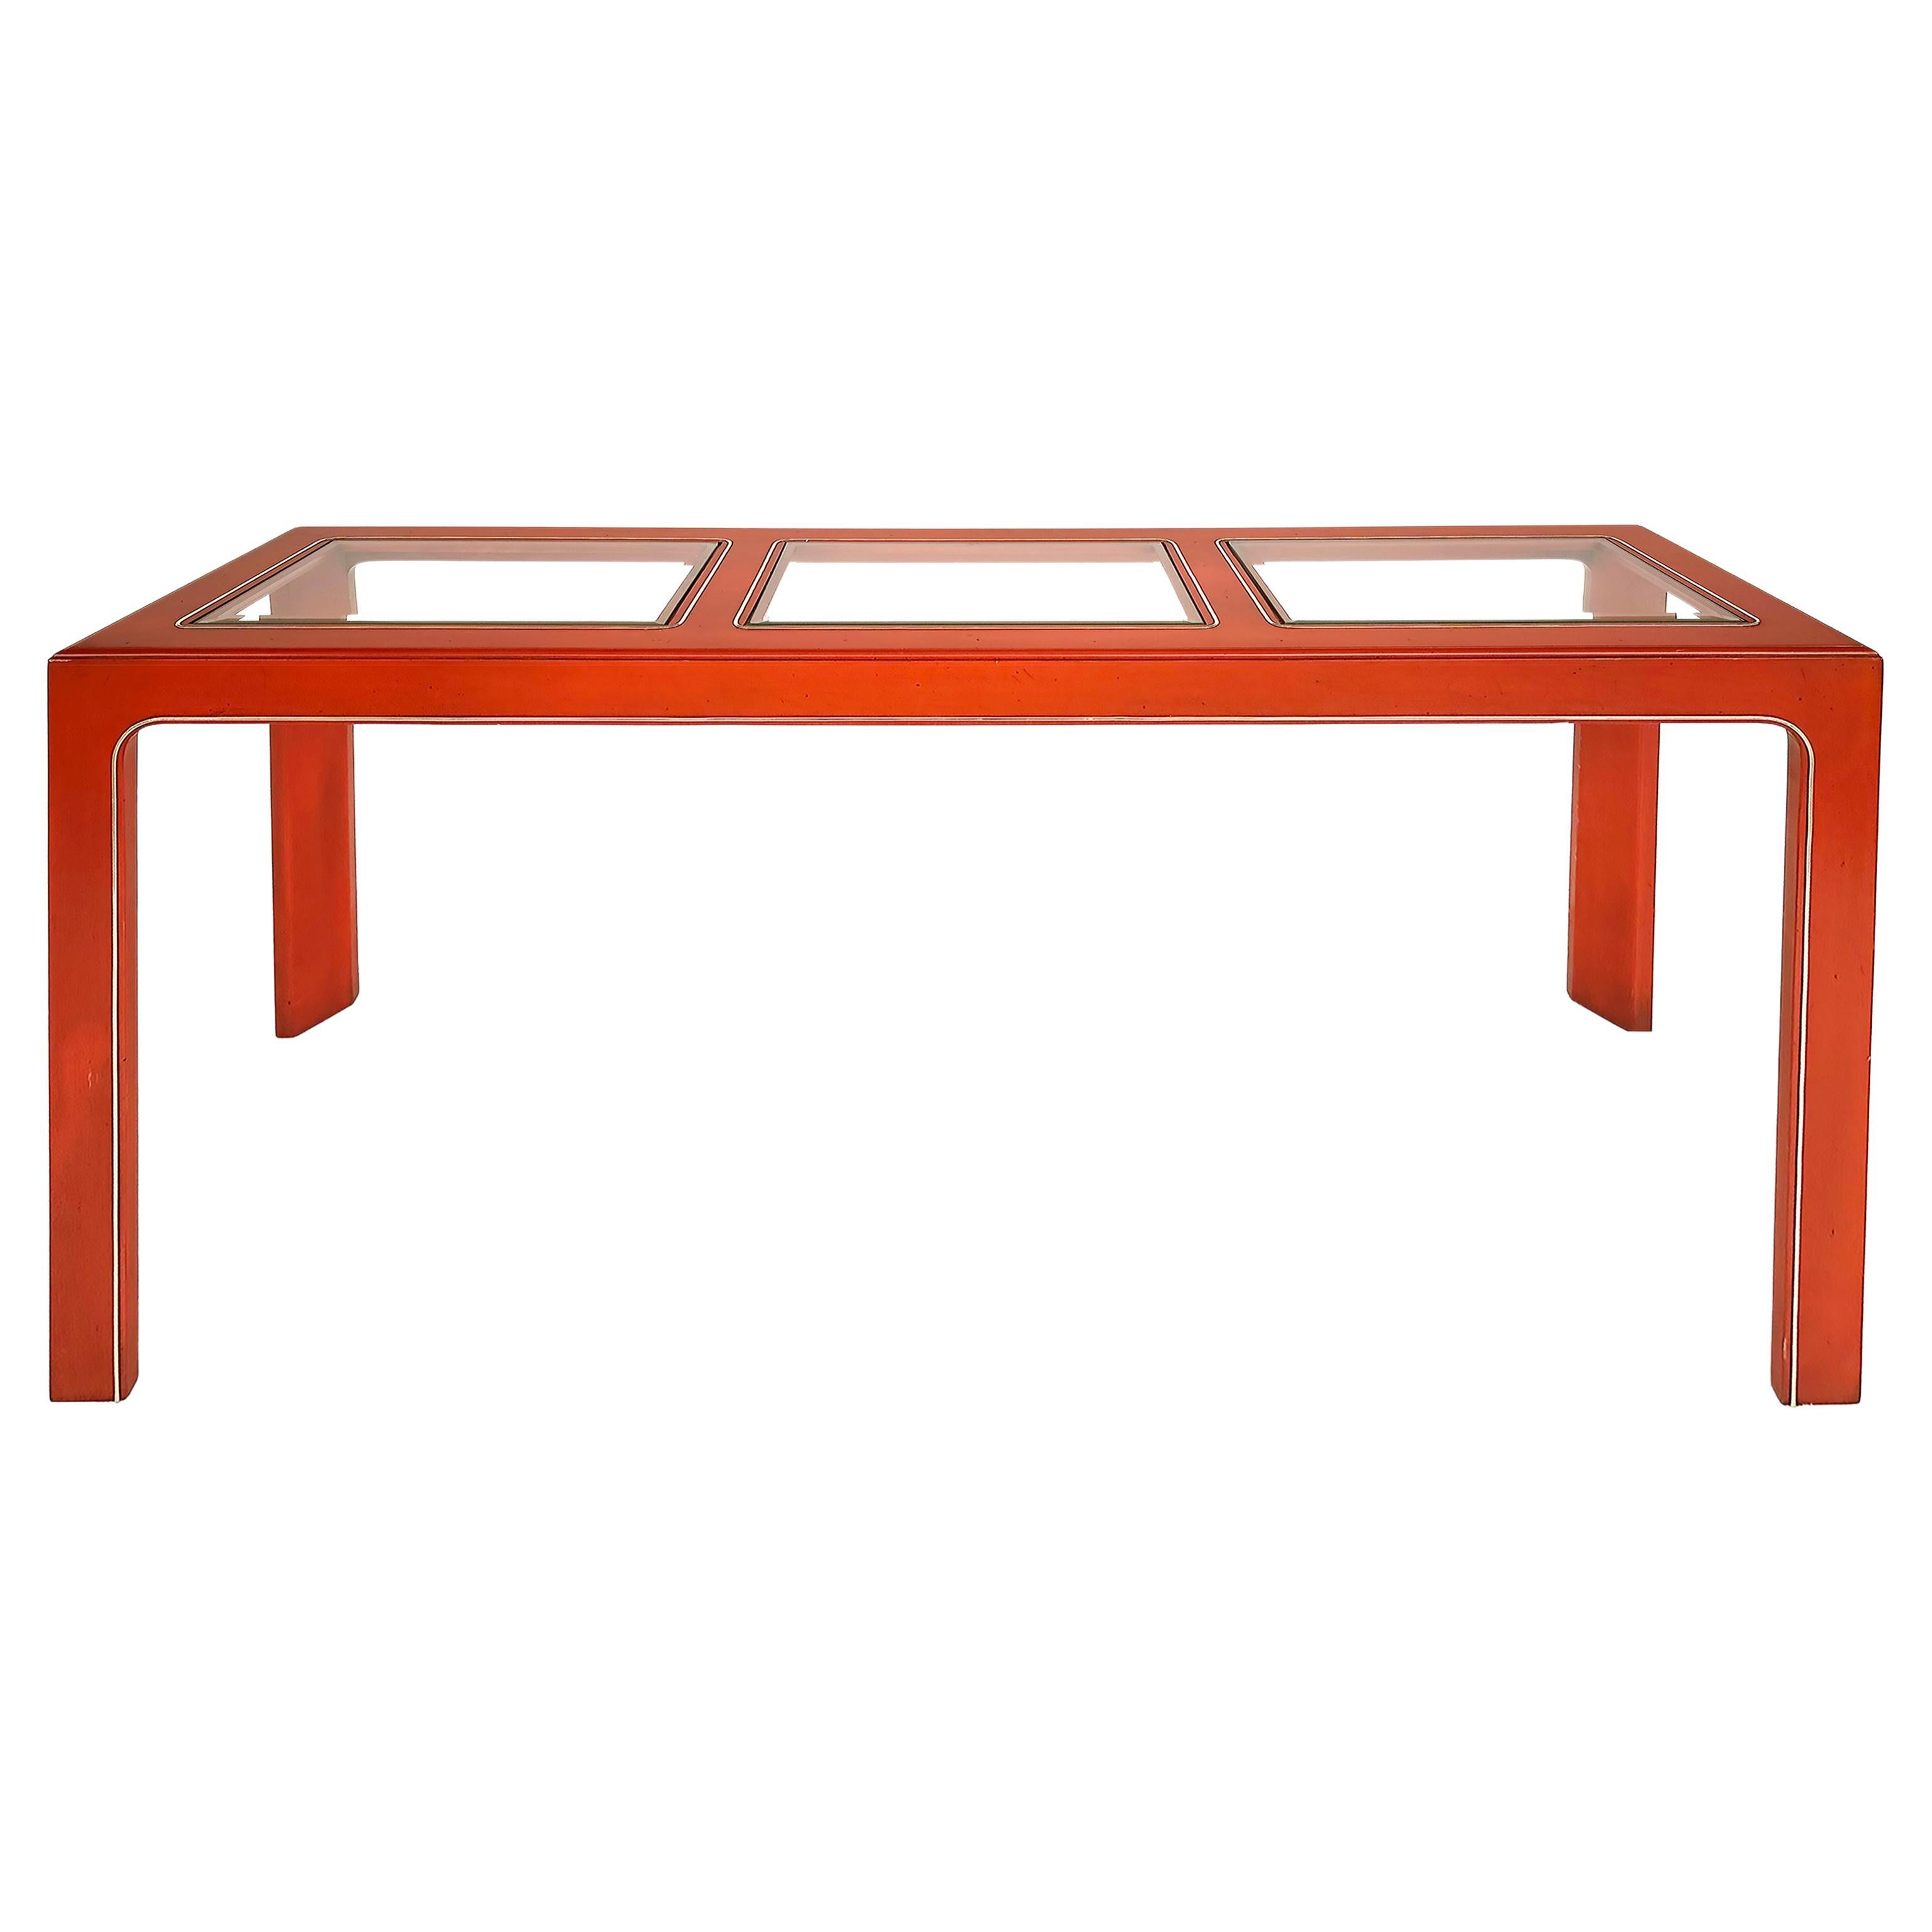 Orange Lacquered Brass Trimmed Console Table with Inset Beveled Glass Tops